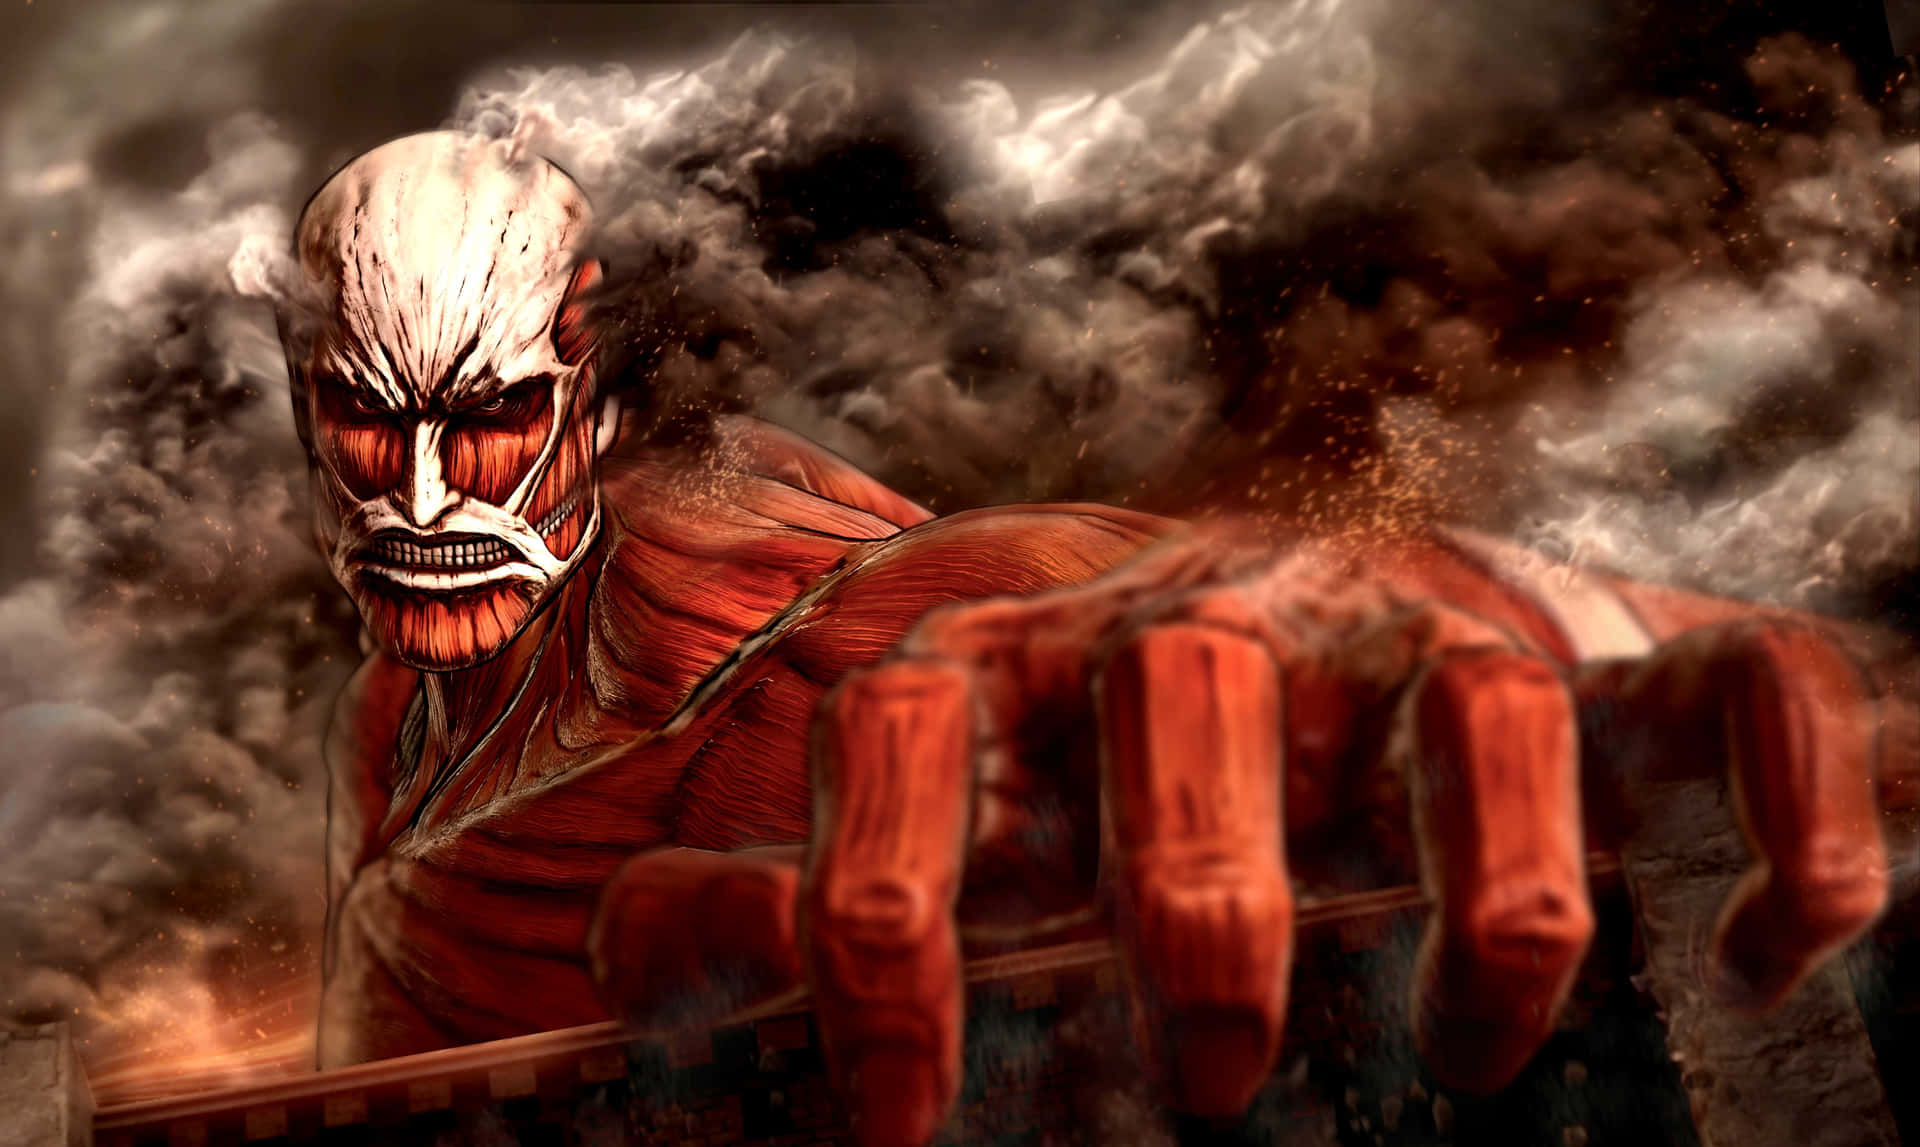 "Prepare yourself to enter the world of Attack On Titan!"